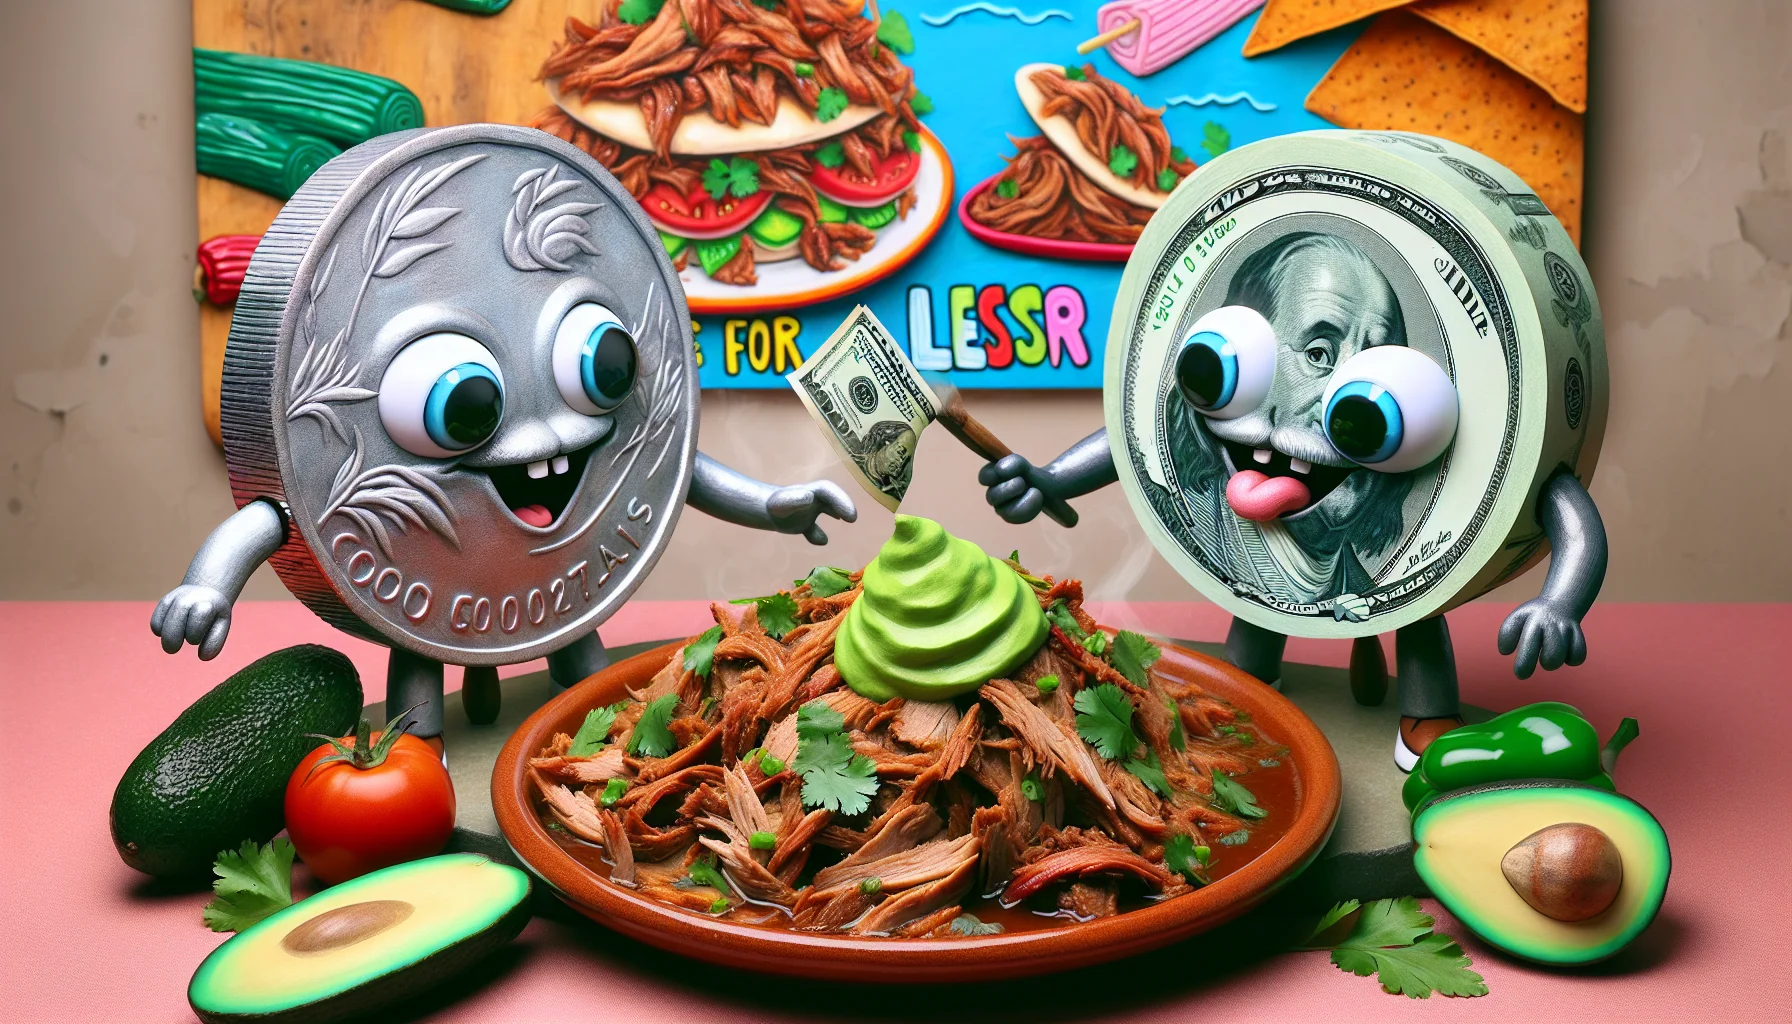 Imagine a whimsical scenario where an enormous silver coin and a vibrant green dollar bill, both equipped with cute facial expressions, are being enticed by the heavenly aroma of a delicious traditional Mexican dish - Pork Carnitas. The Pork Carnitas is cooked to perfection, with tender shredded meat, a smattering of cilantro and bell peppers, and a side of avocados and tomatoes, all presented beautifully in a ceramic dish. A colorful sign behind the animated money characters reads, 'Eat Healthy for Less.' This image combines humor, food art, and a strong message about the financial benefits of healthy eating.